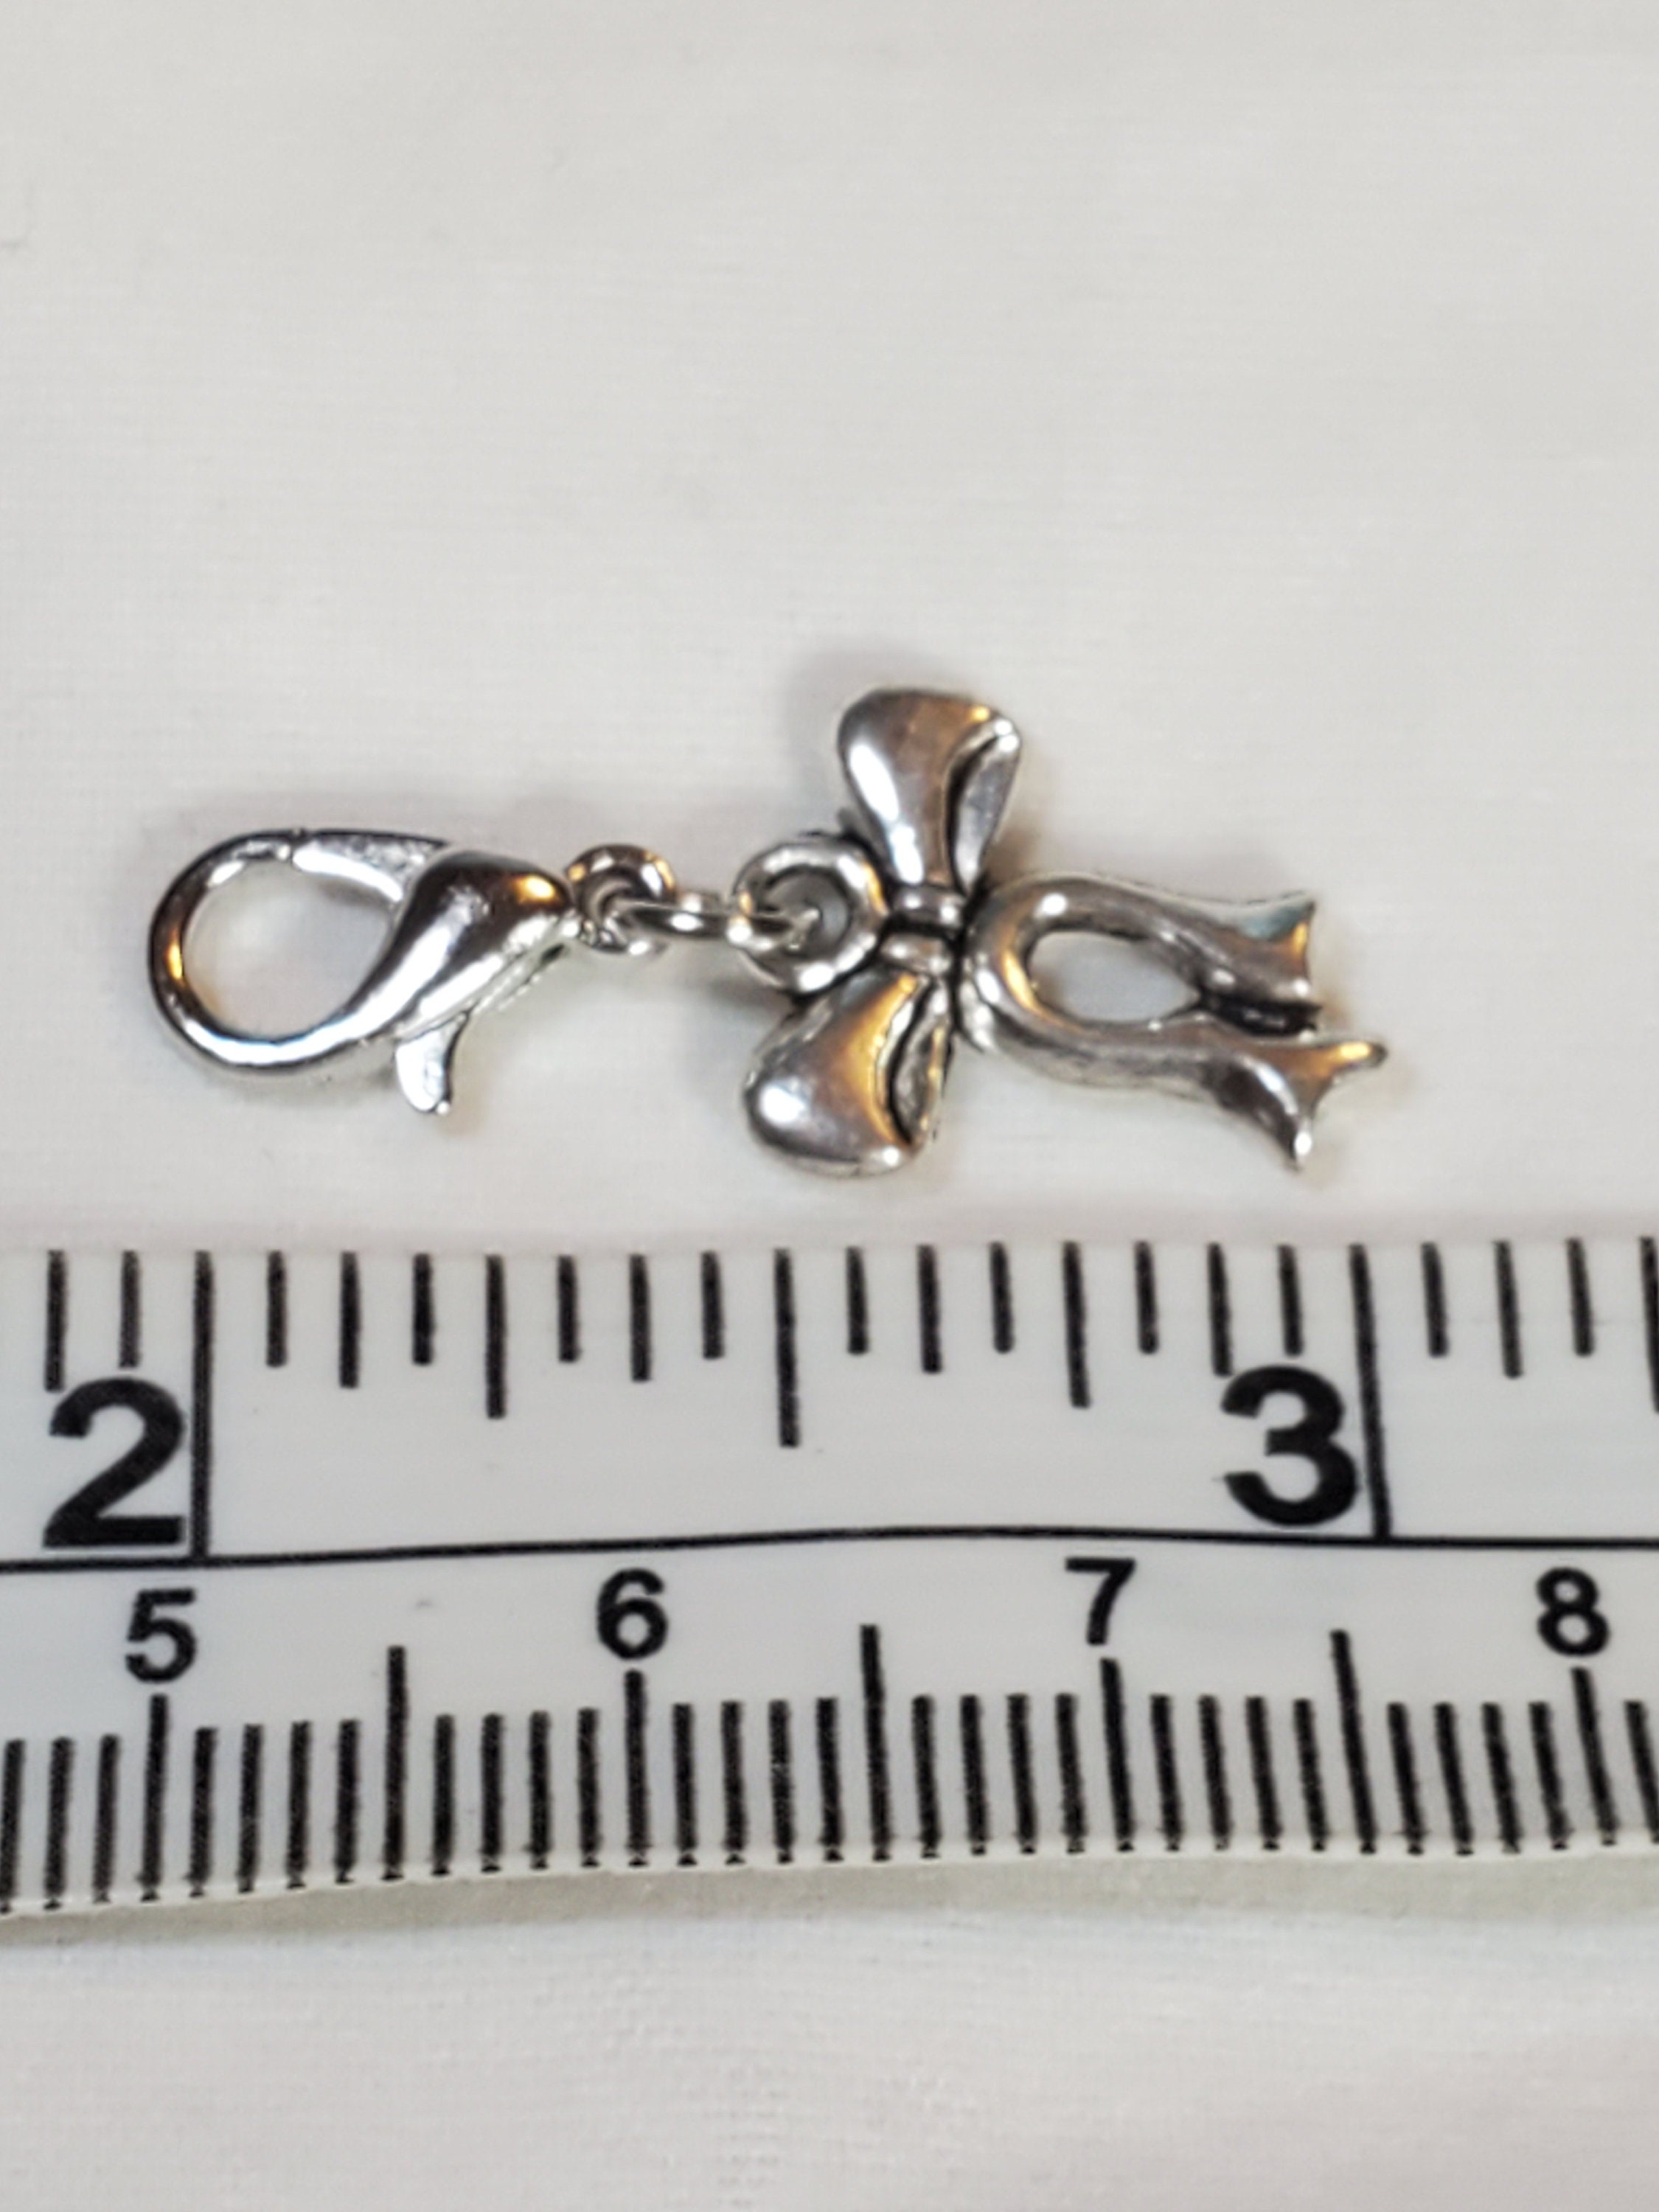 5 Pc. Bow Charm, Bow Connector Charm, Silver Charms, DIY Jewelry